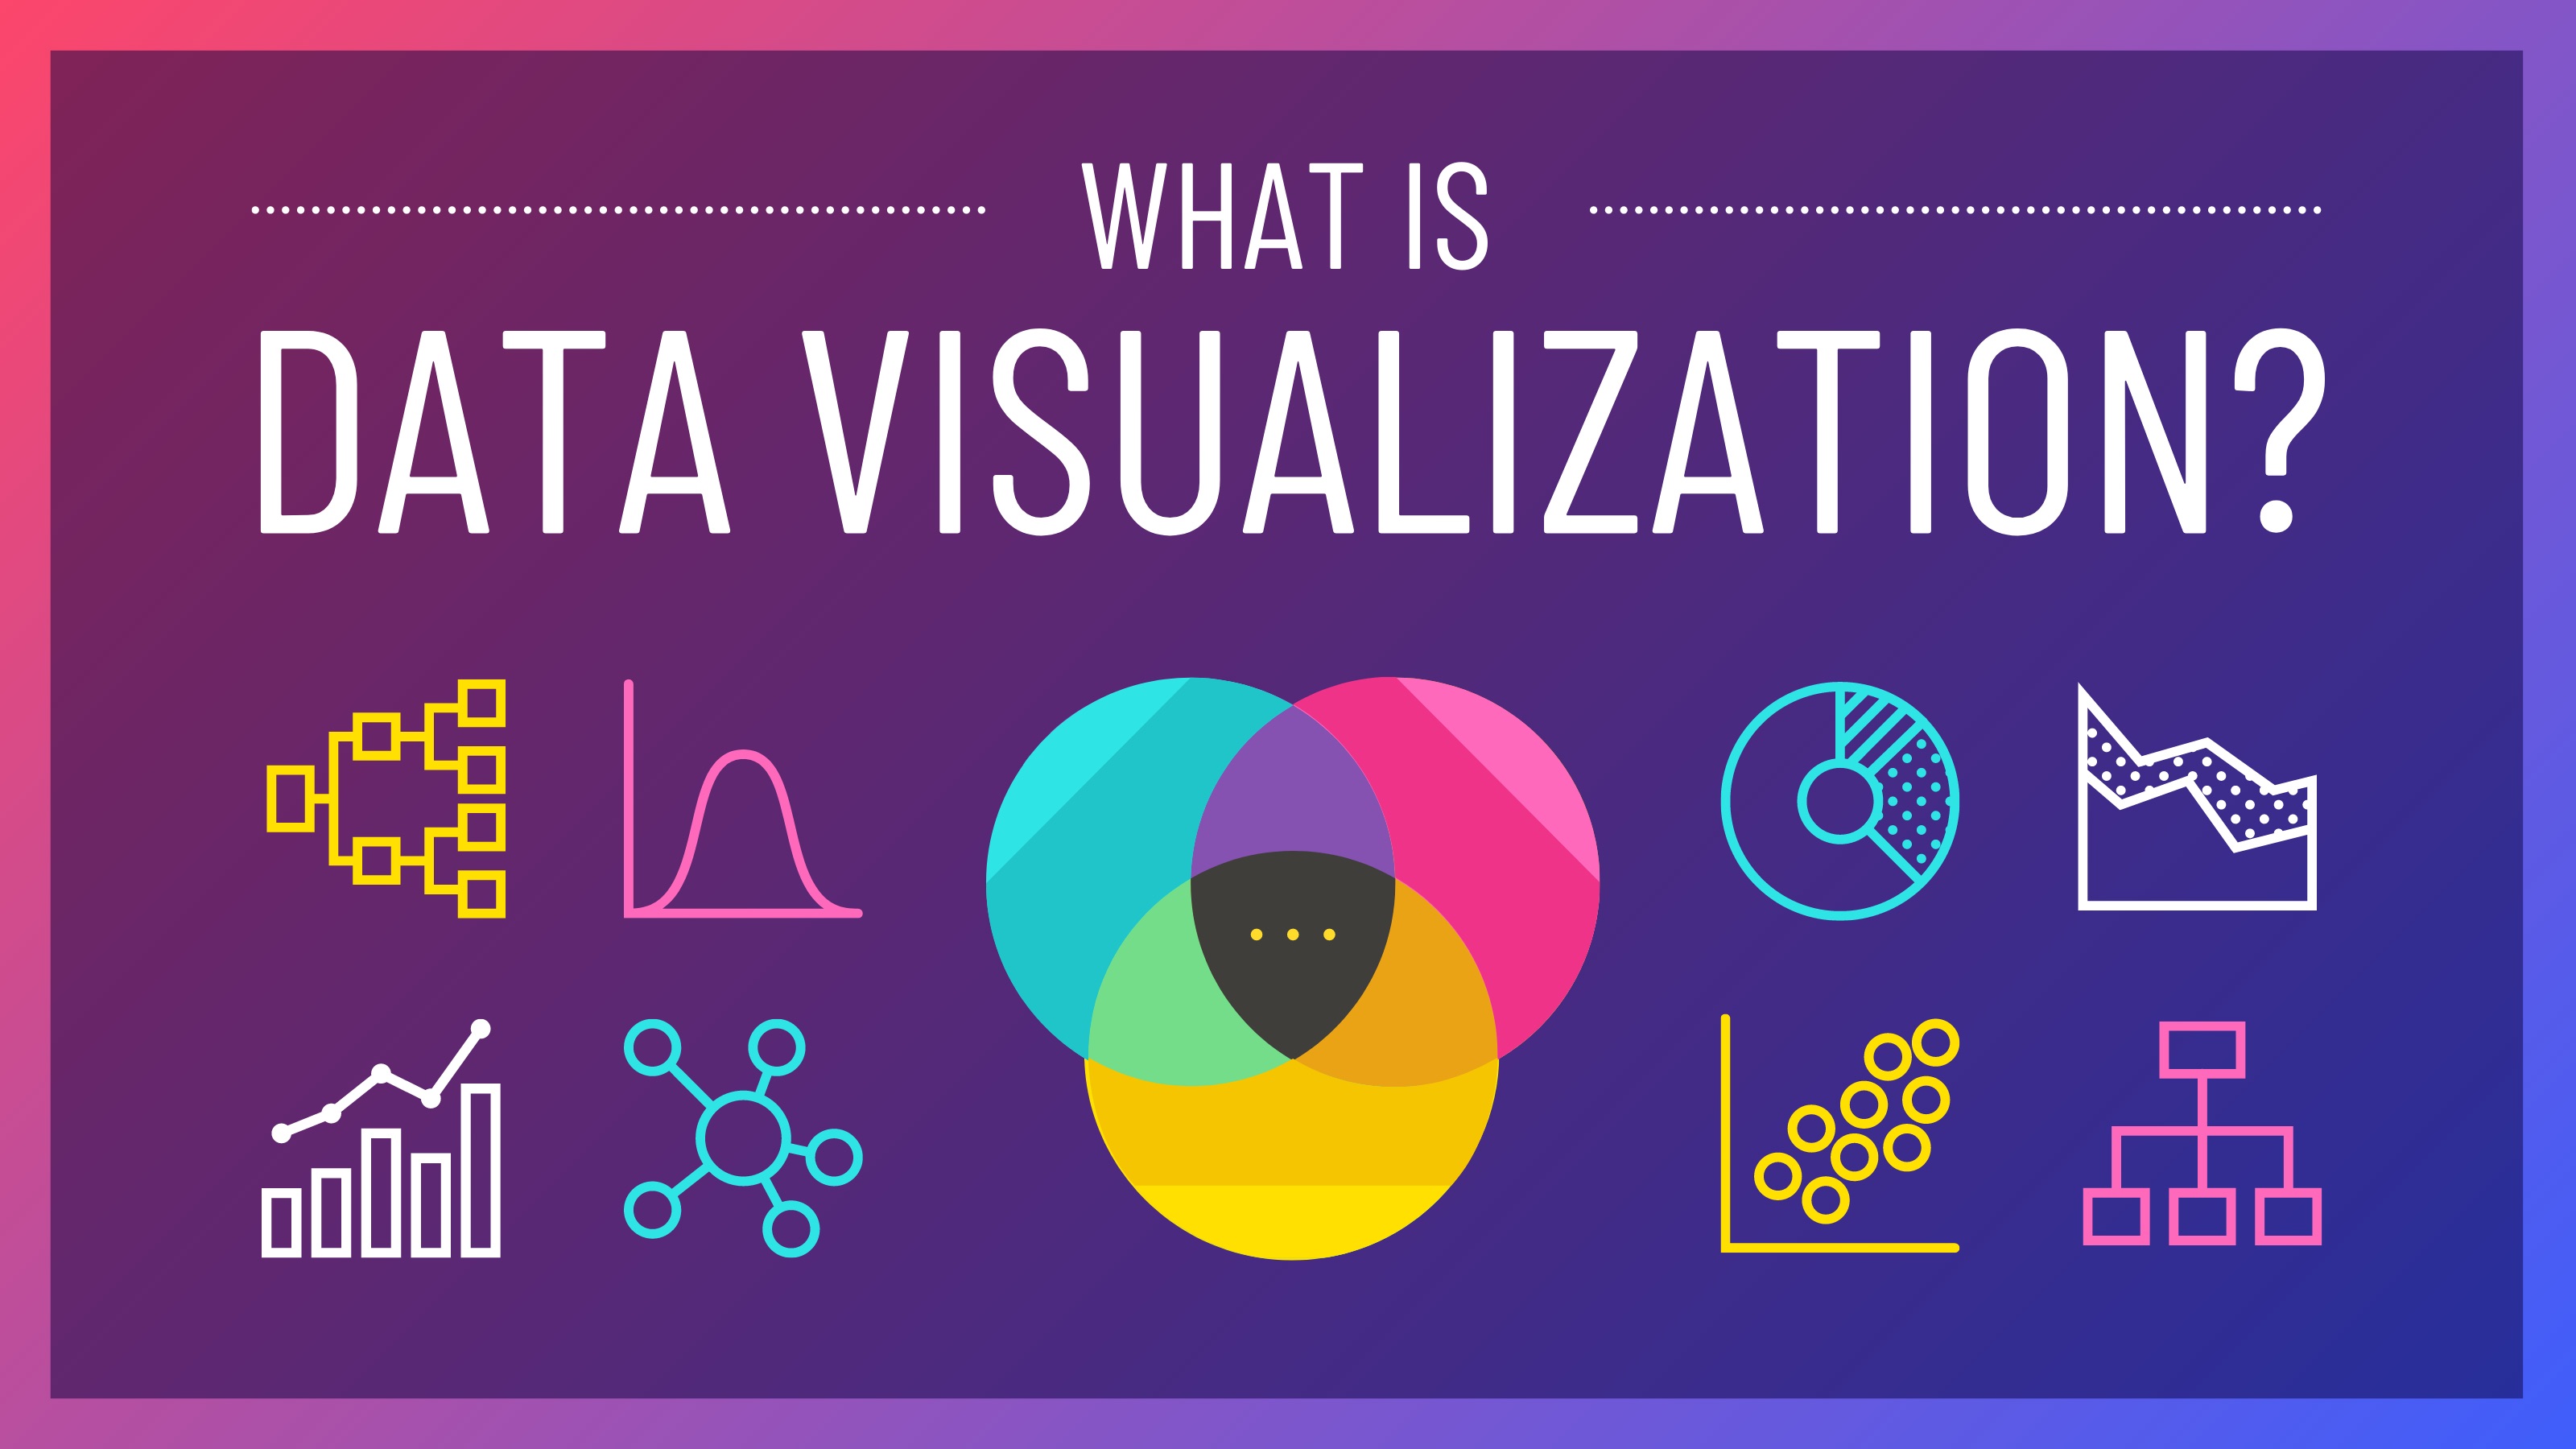 What is data visualization?